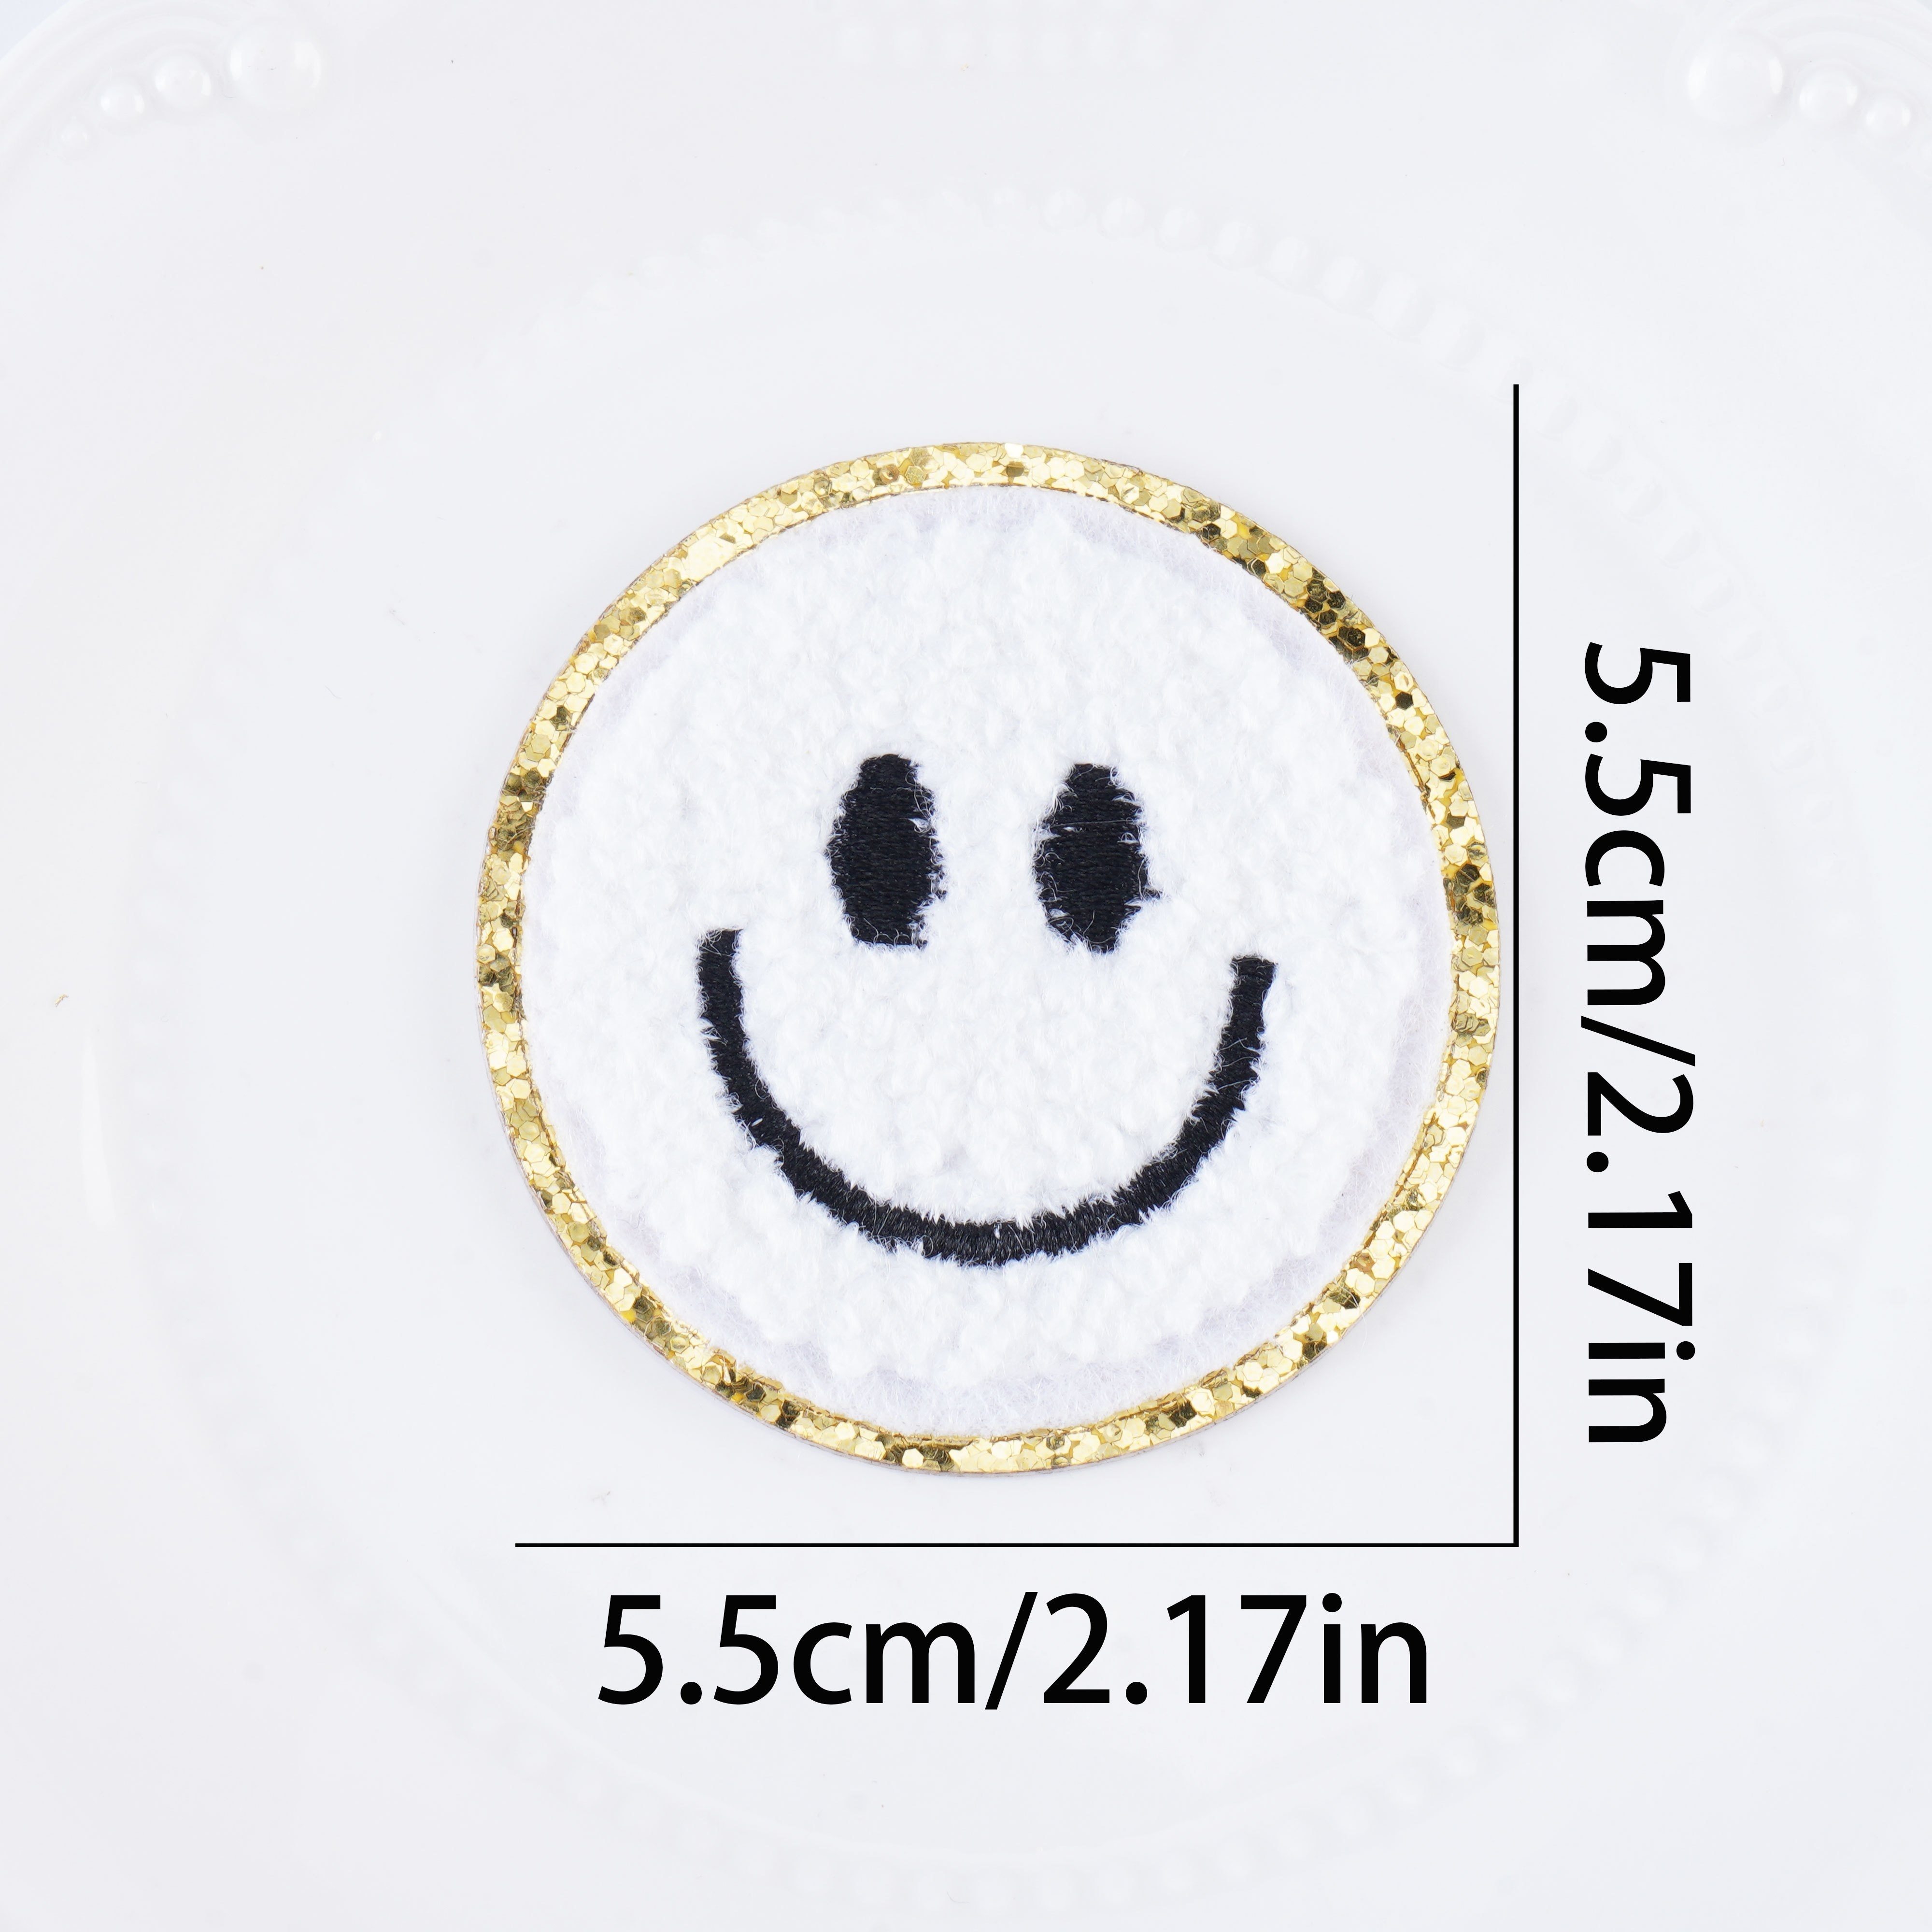 12 Pcs Smile Face Patch Iron On Patches Happy Face Chenille Patches for  Clothes Dress Jackets Smile Patches for Hats Cute Embroidery DIY Project  Craft